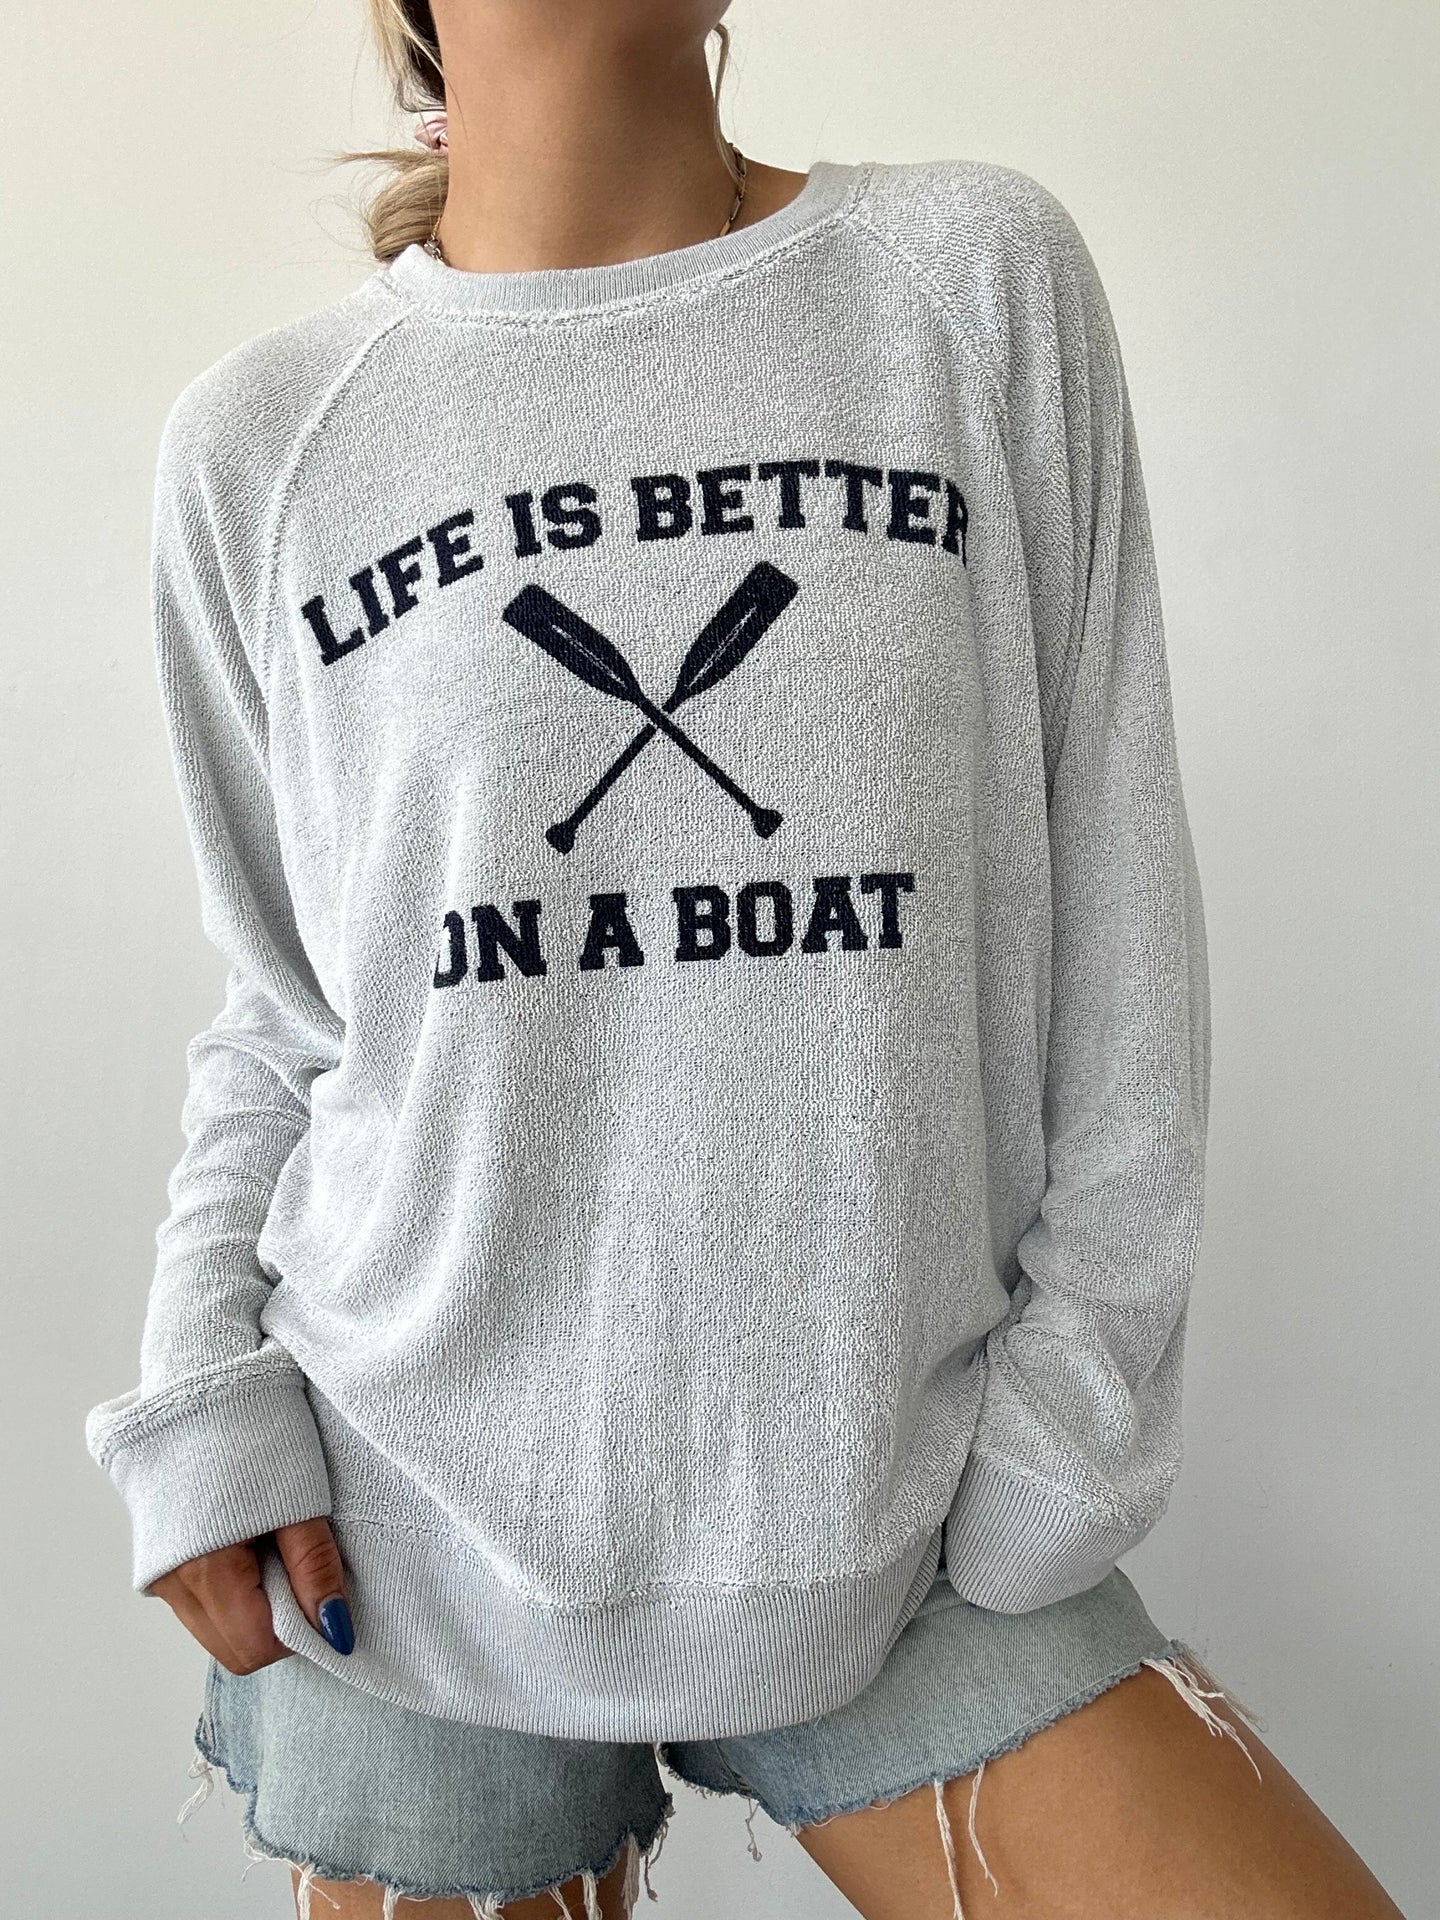 “Life Is Better On A Boat” Crewneck